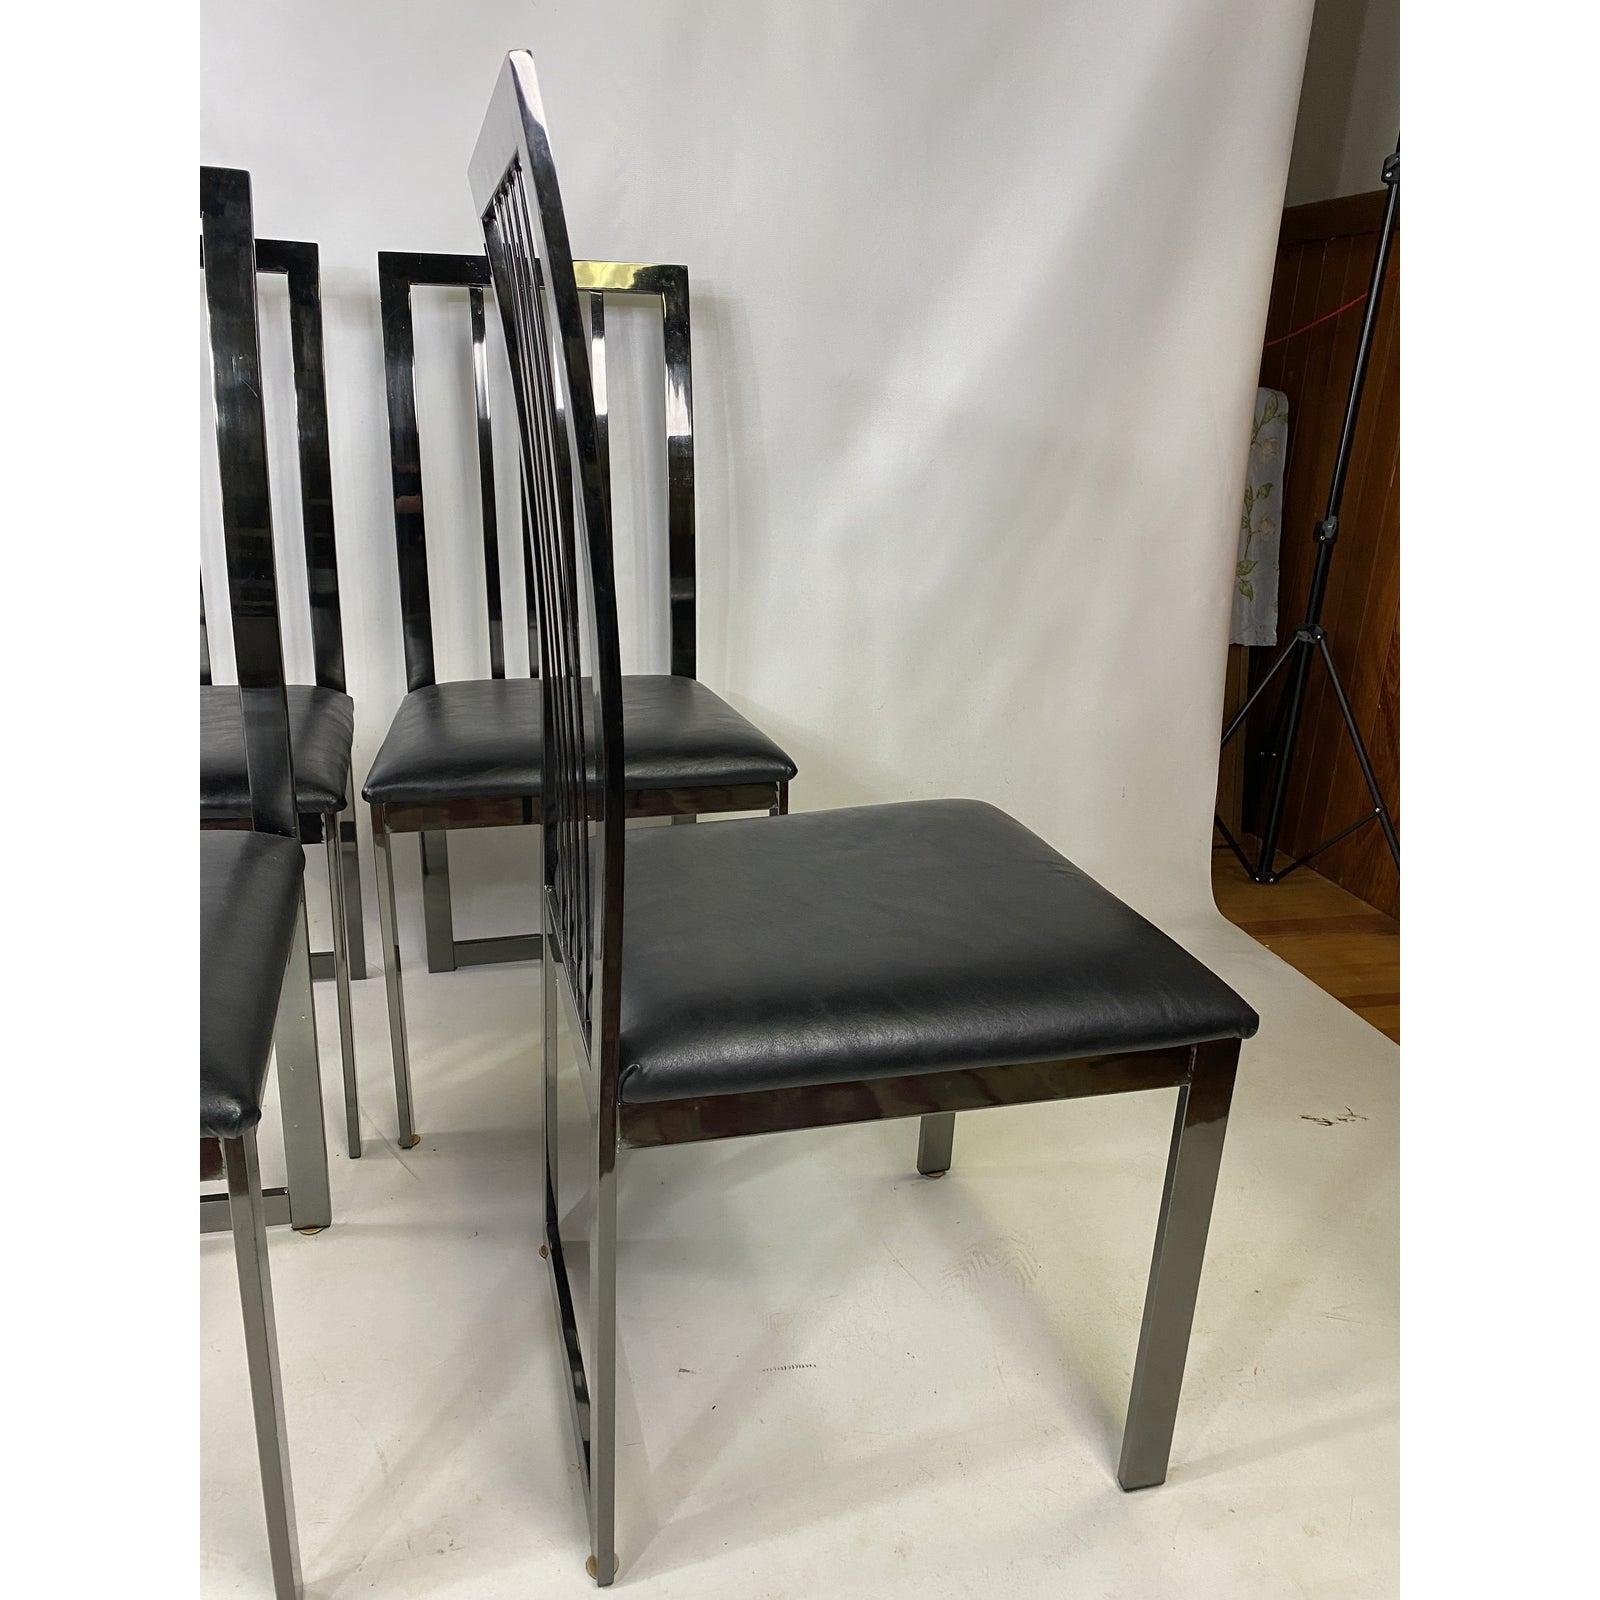 Dia Stylish Vintage Chrome High Back Dining Chairs Baughman Style, Set of 4 In Good Condition For Sale In Esperance, NY